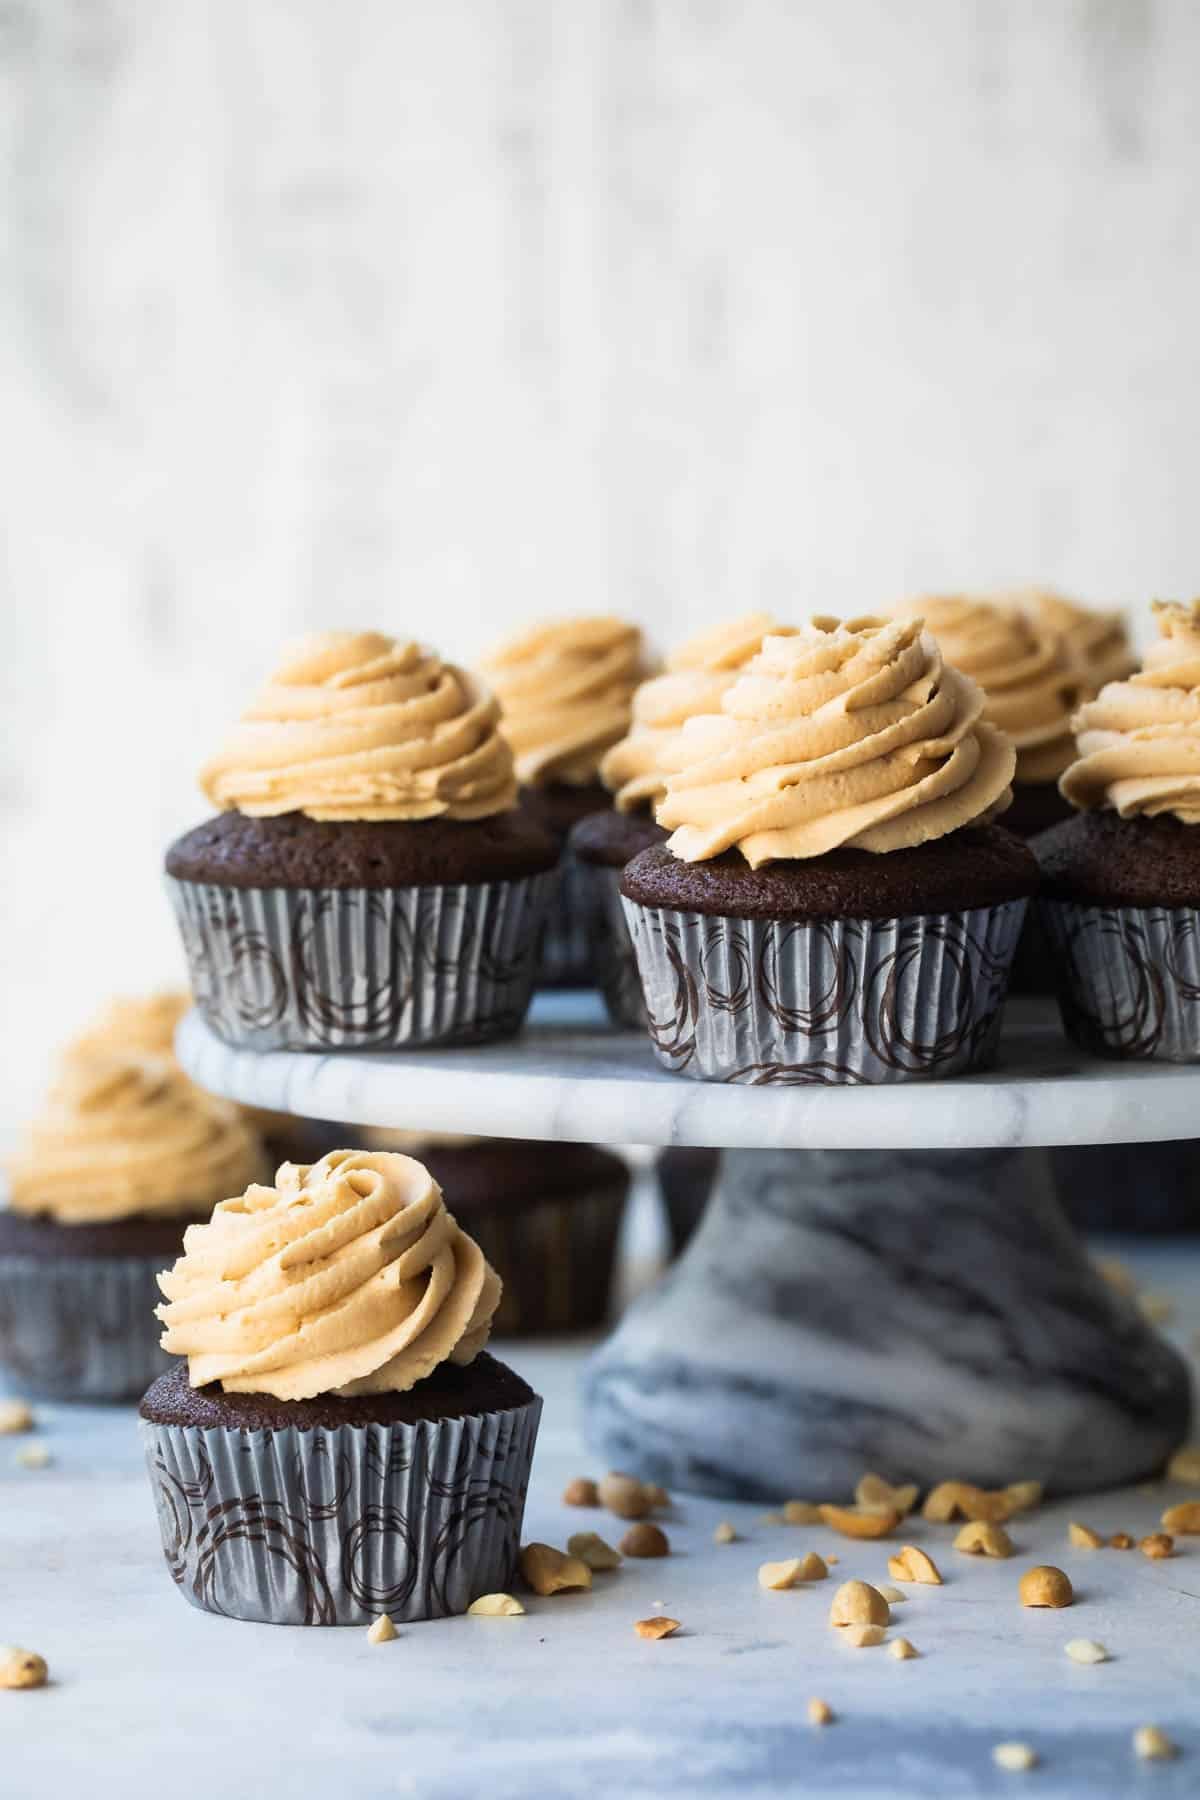 A cake stand filled with chocolate cupcakes with peanut butter frosting.